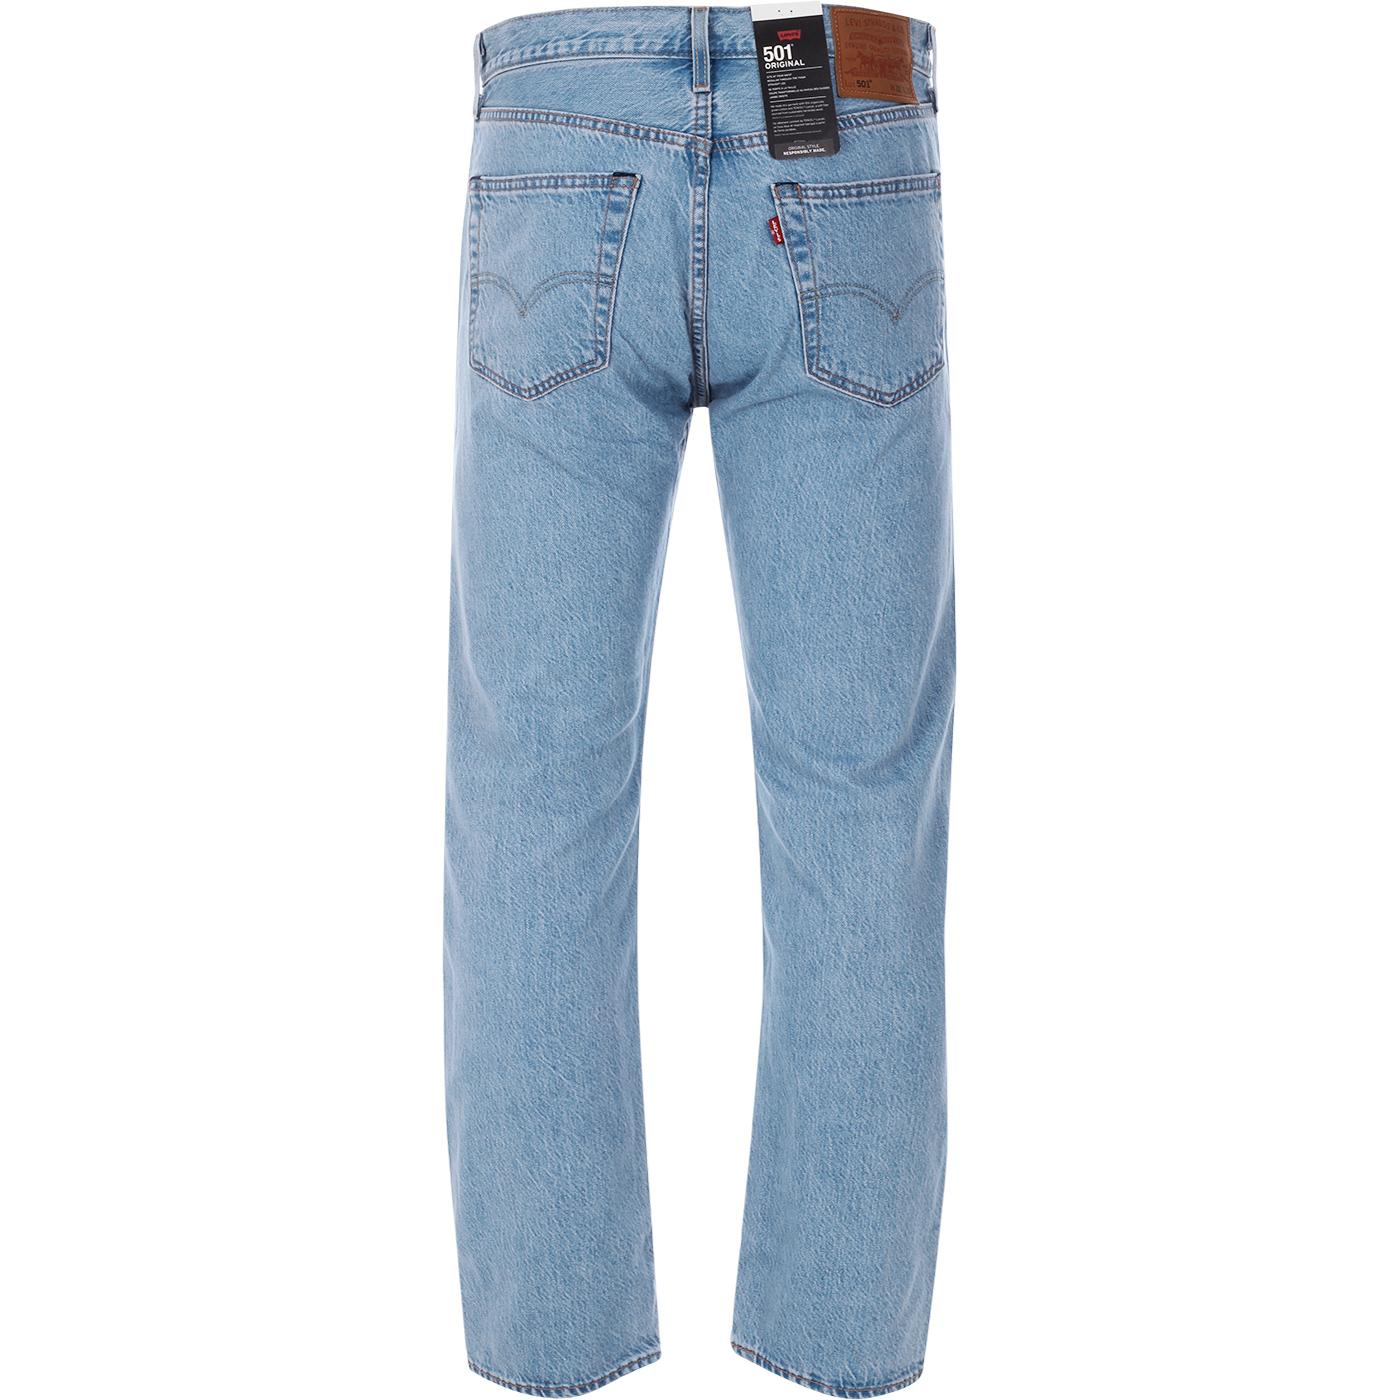 LEVI'S® 501® Original Straight Fit Retro Jeans in Canyon Moon